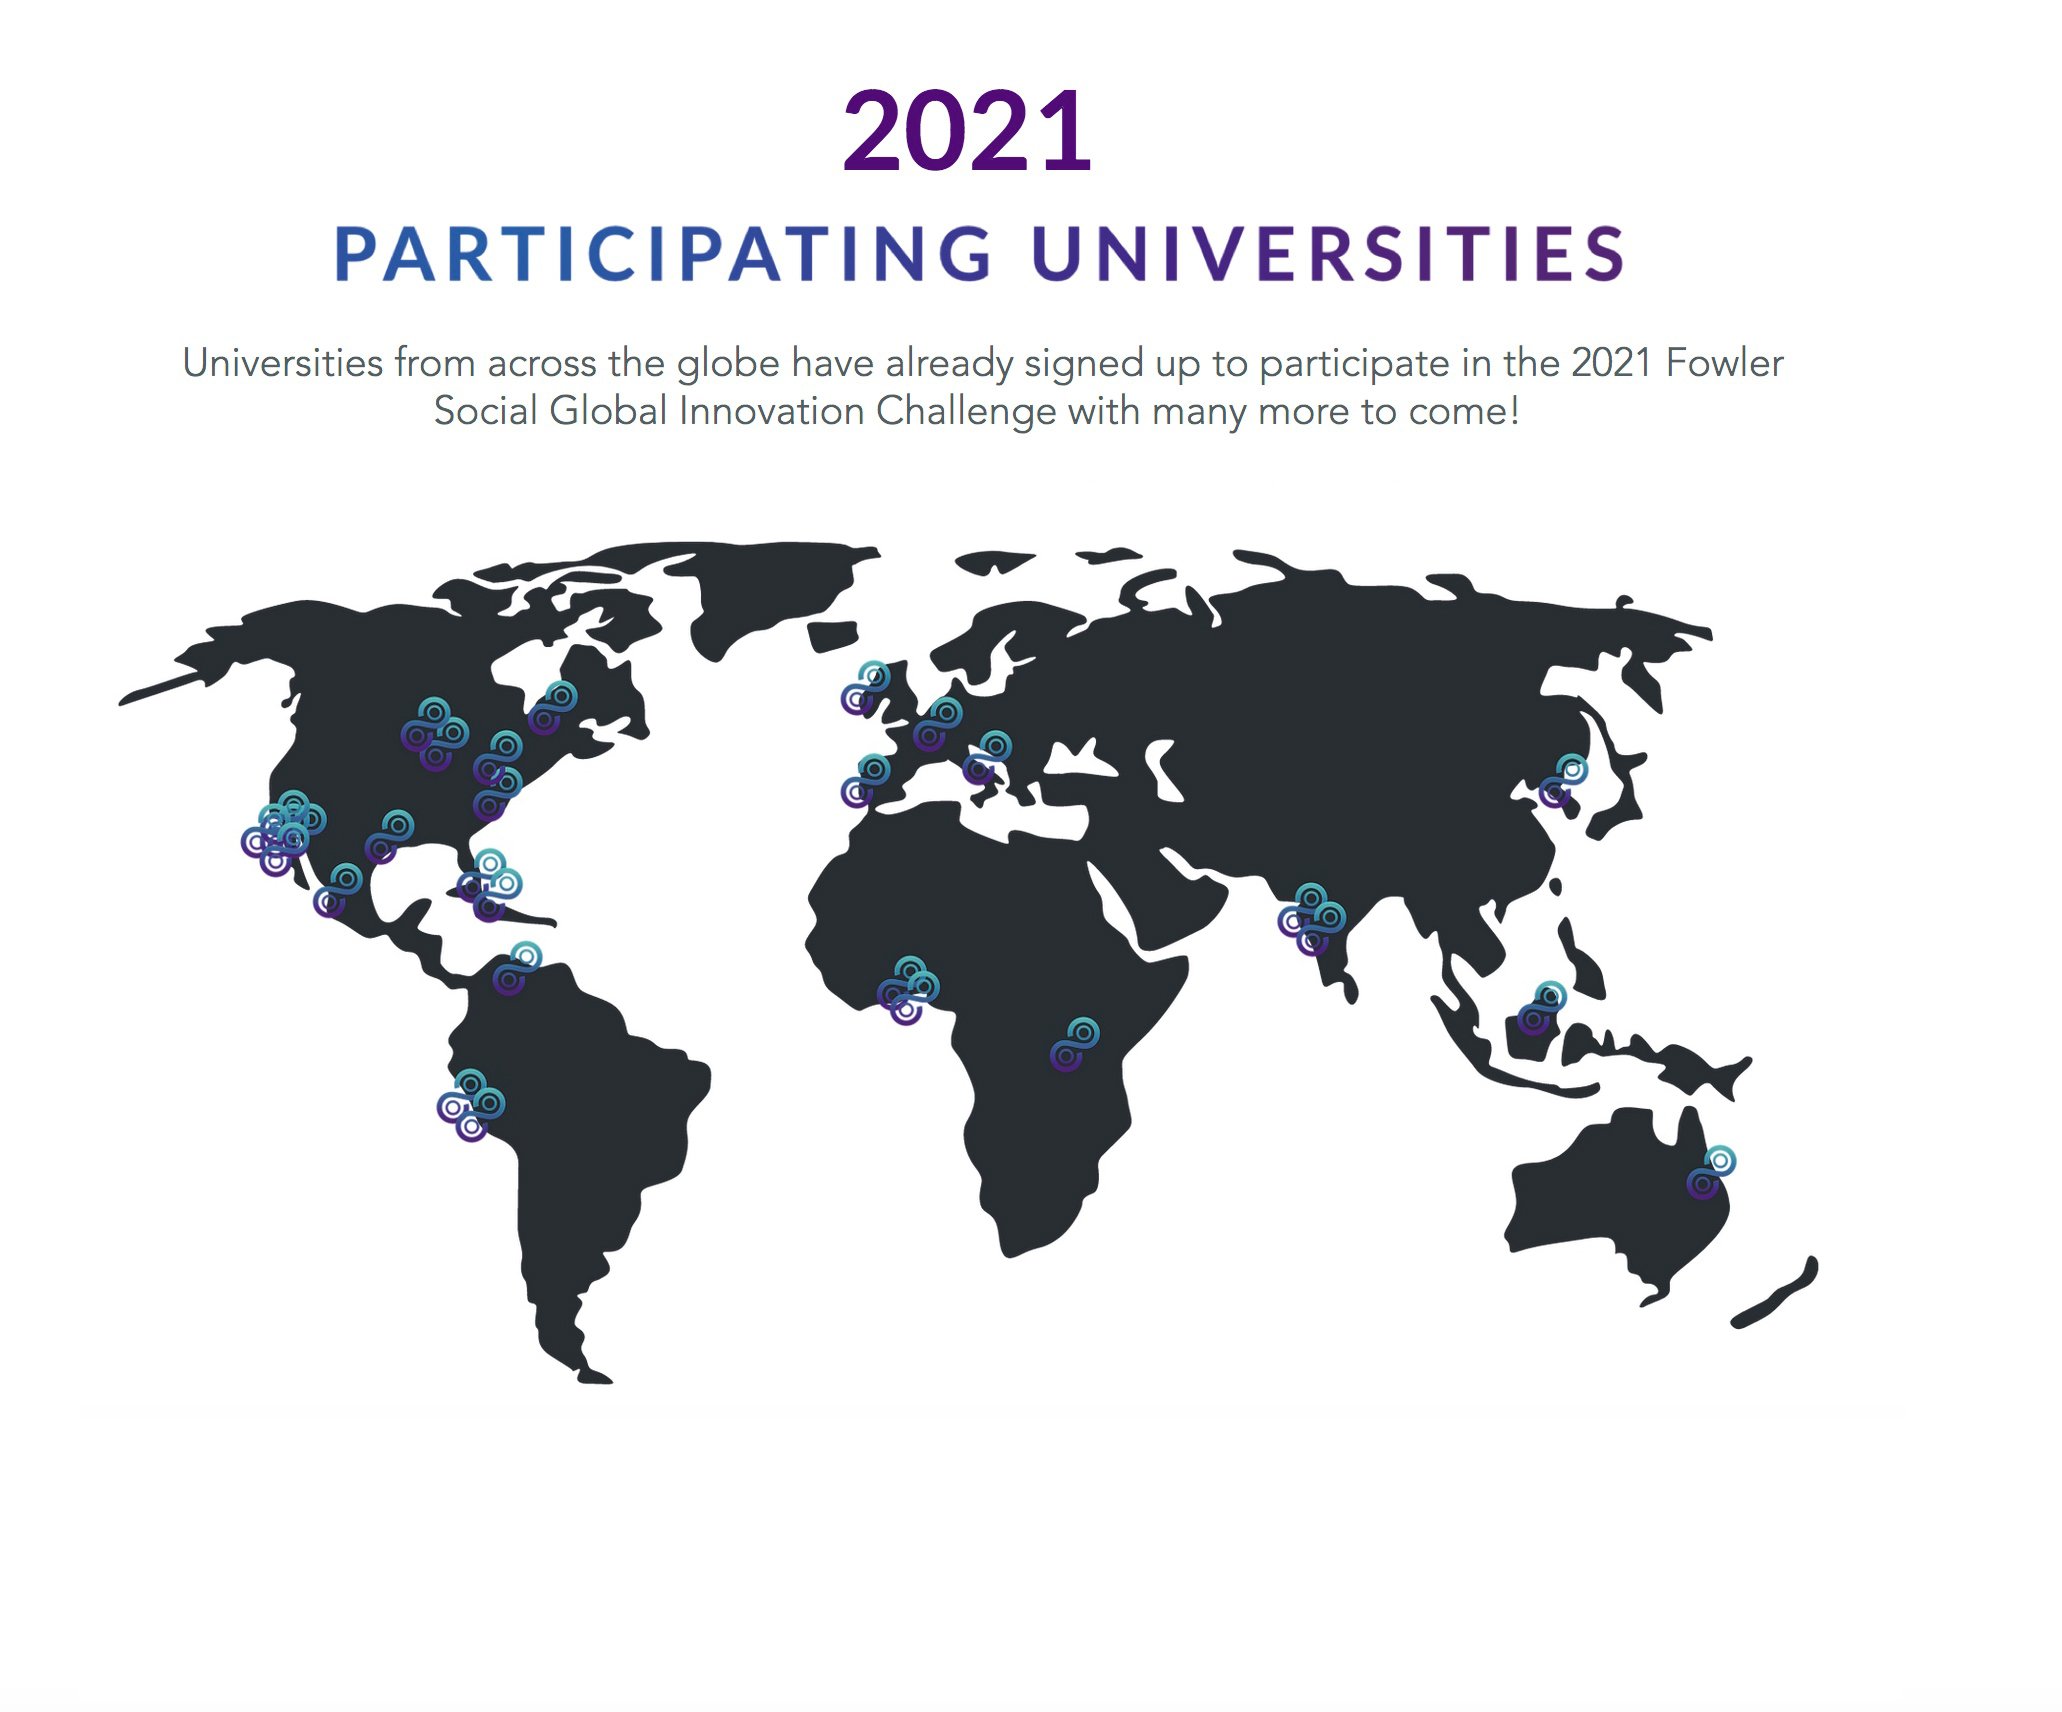 29 Universities and a Record-Setting 15 Countries for the 2021 Fowler Global Social Innovation Challenge